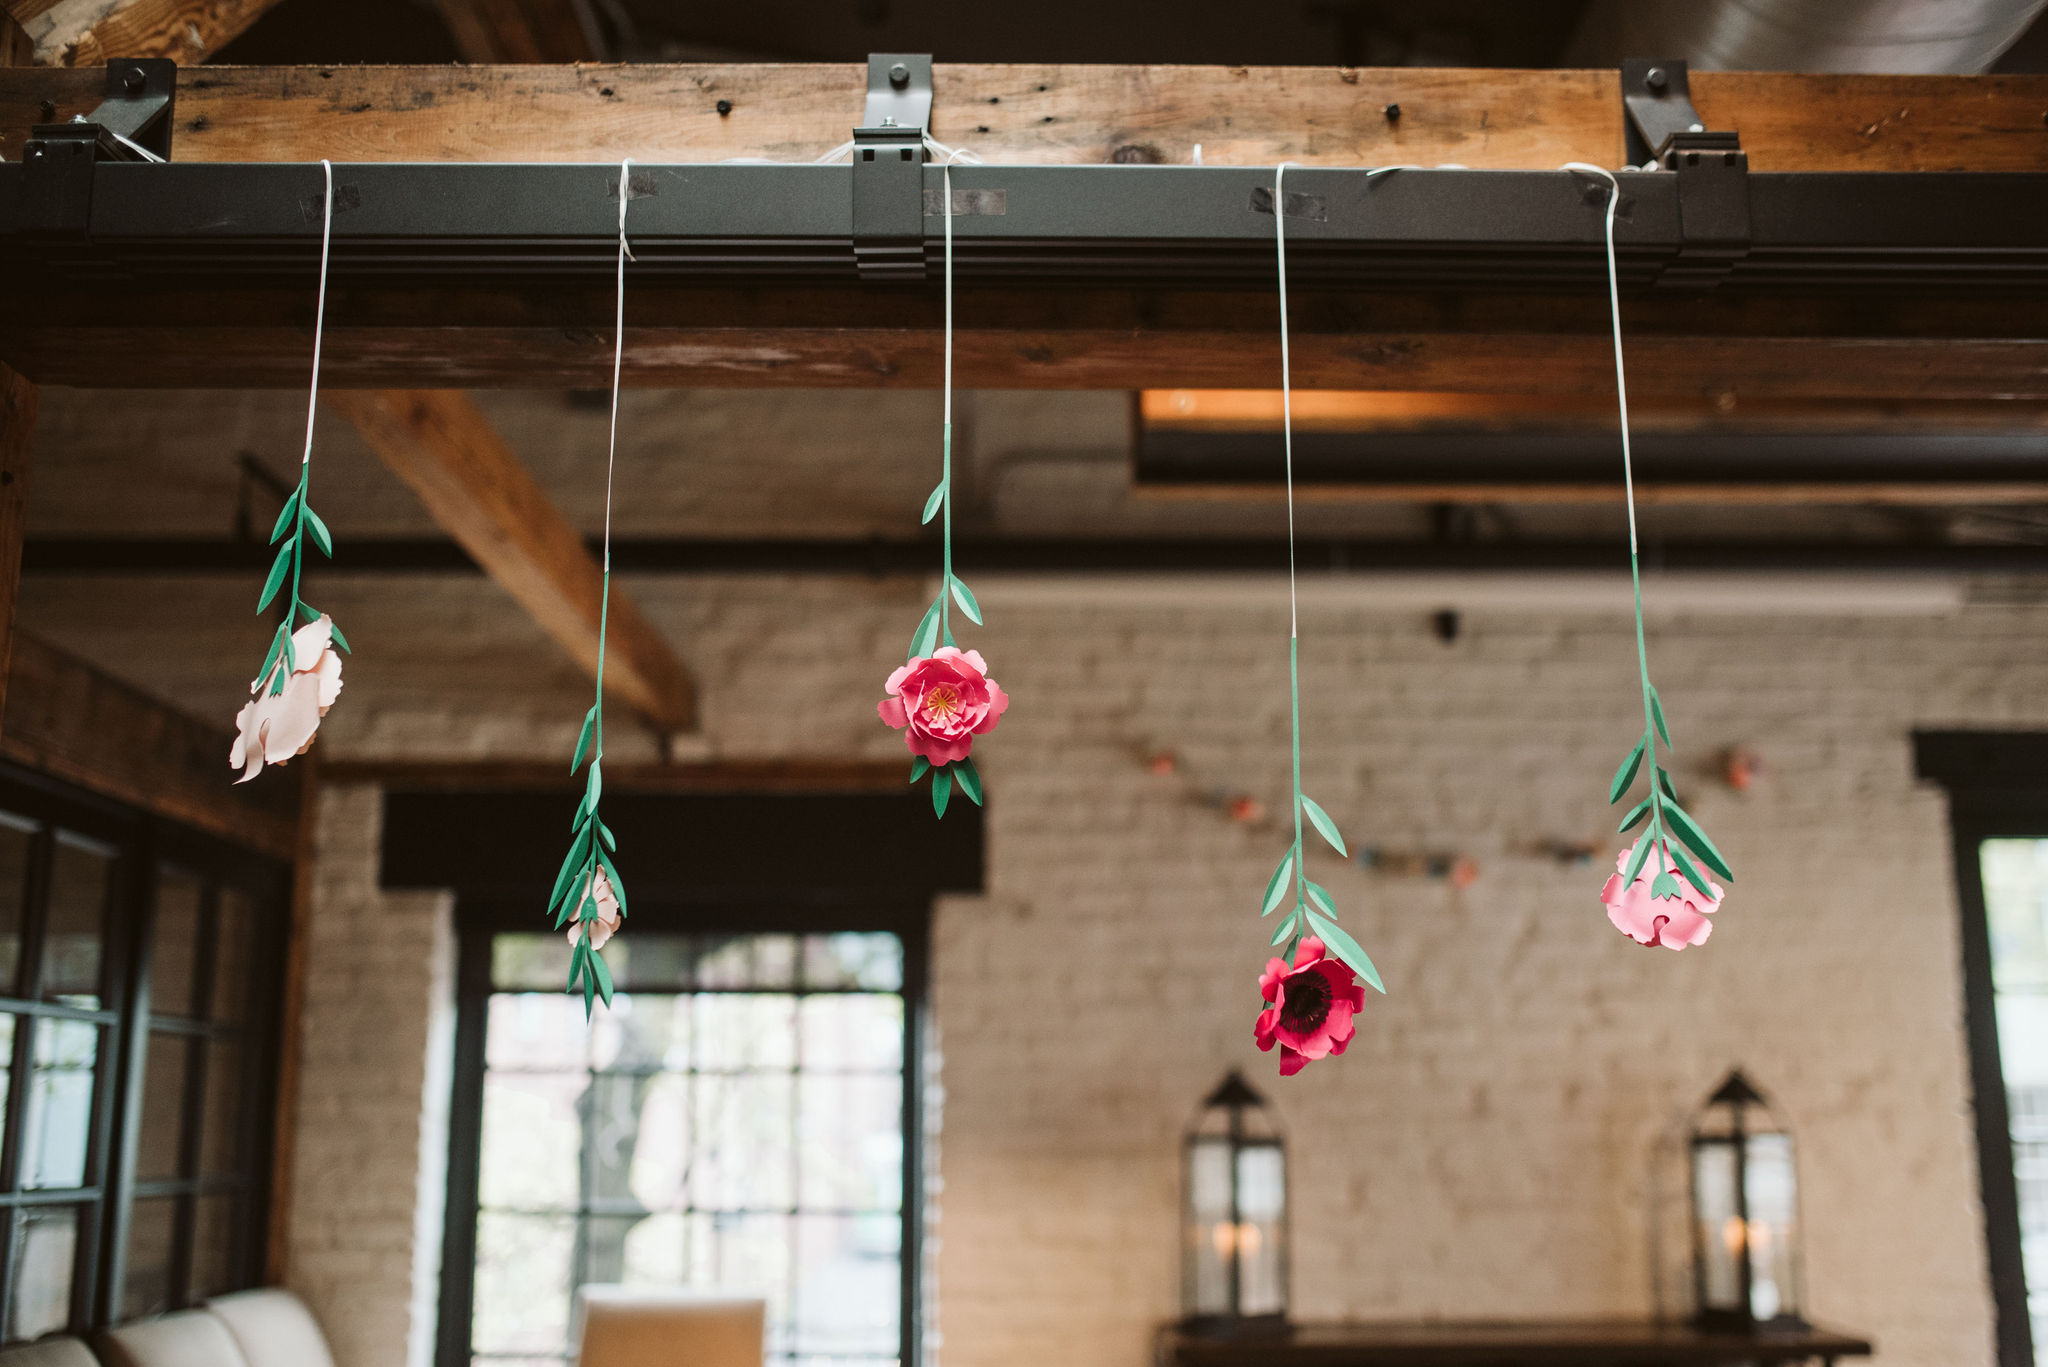  Washington DC, Baltimore Wedding Photographer, Alexandria, Old Town, Jewel Tone, Romantic, Modern, Virtue Feed &amp; Grain, Paper Flowers Hanging from the Ceiling  